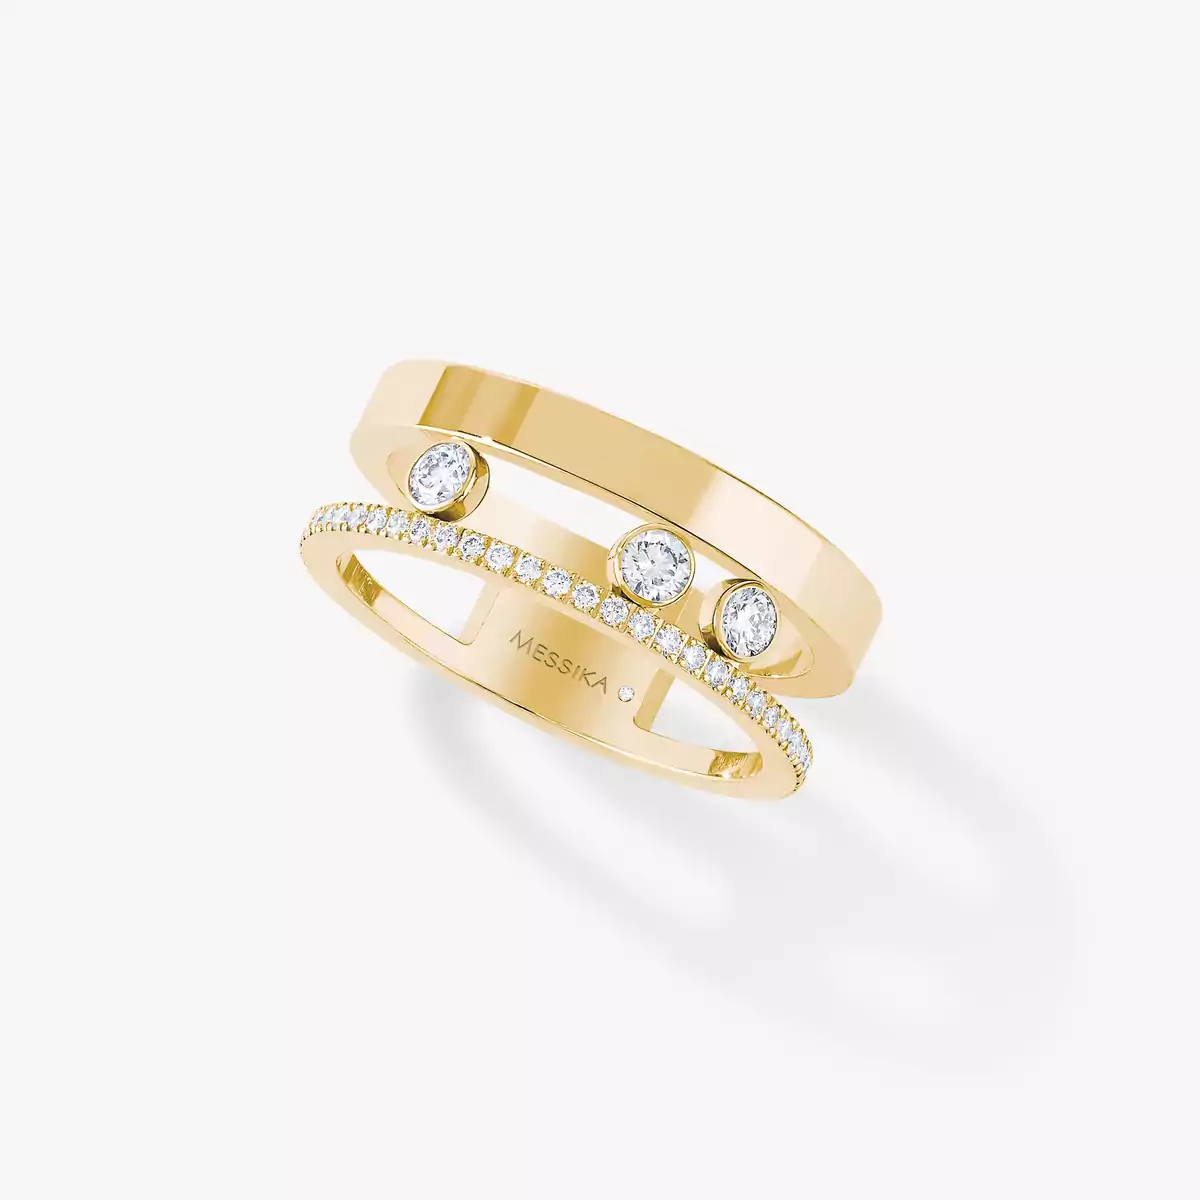 Move Romane  Yellow Gold For Her Diamond Ring 06516-YG